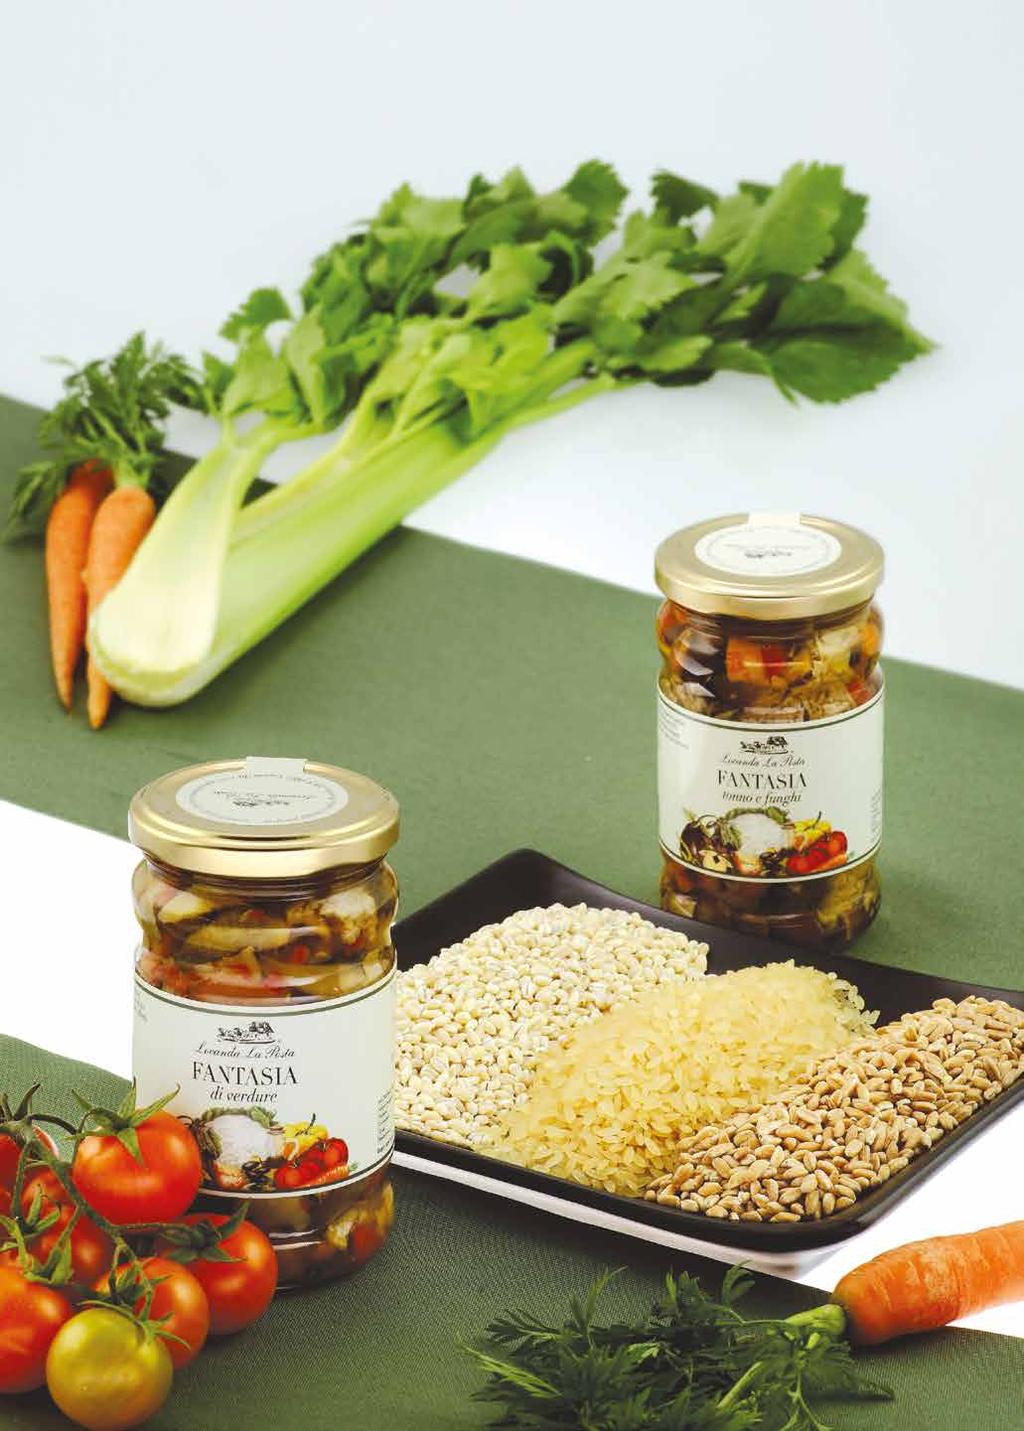 Condiment for rice, barley and spelled 001 (1) Vegetable fantasy 002 (2) Mushroom and tuna fantasy 1) Ingredients: artichokes, carrot, cauliflower, pepper, onion, gherkin, leccine olives,